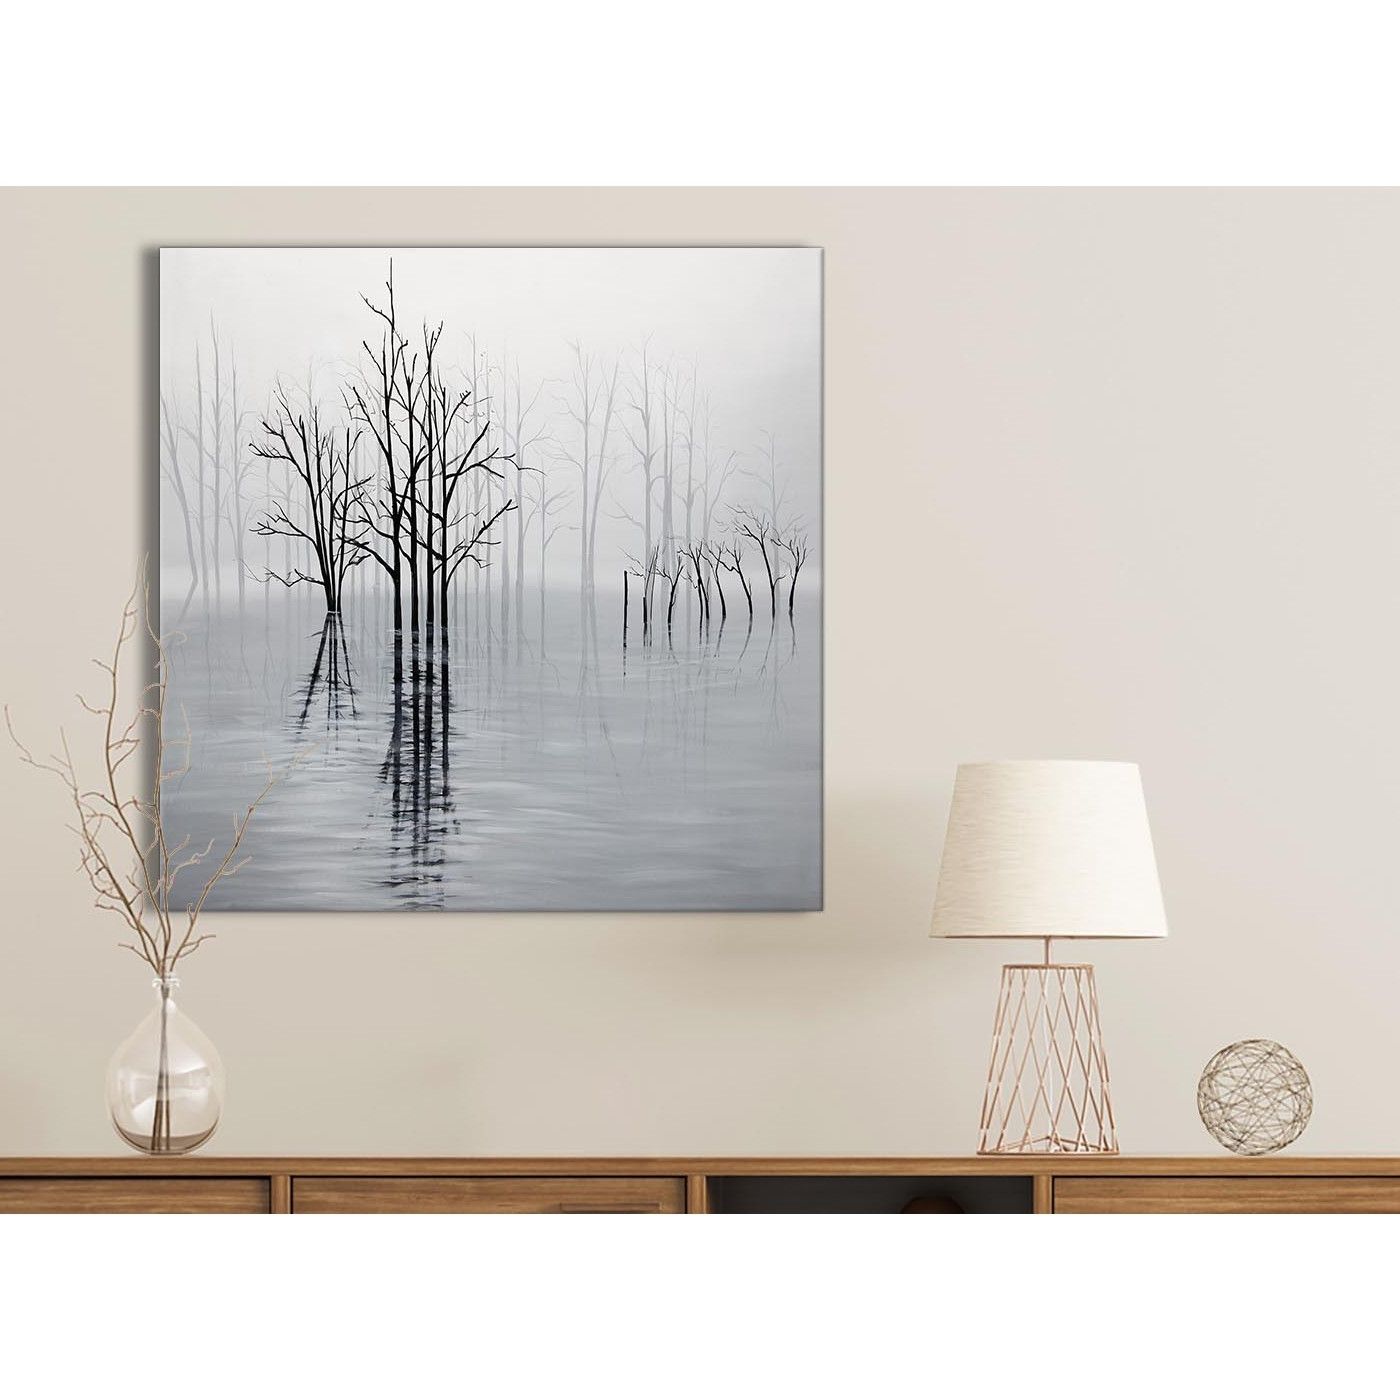 Widely Used Black White Grey Tree Landscape Painting Kitchen Canvas Wall Art Throughout Grey And White Wall Art (View 5 of 20)